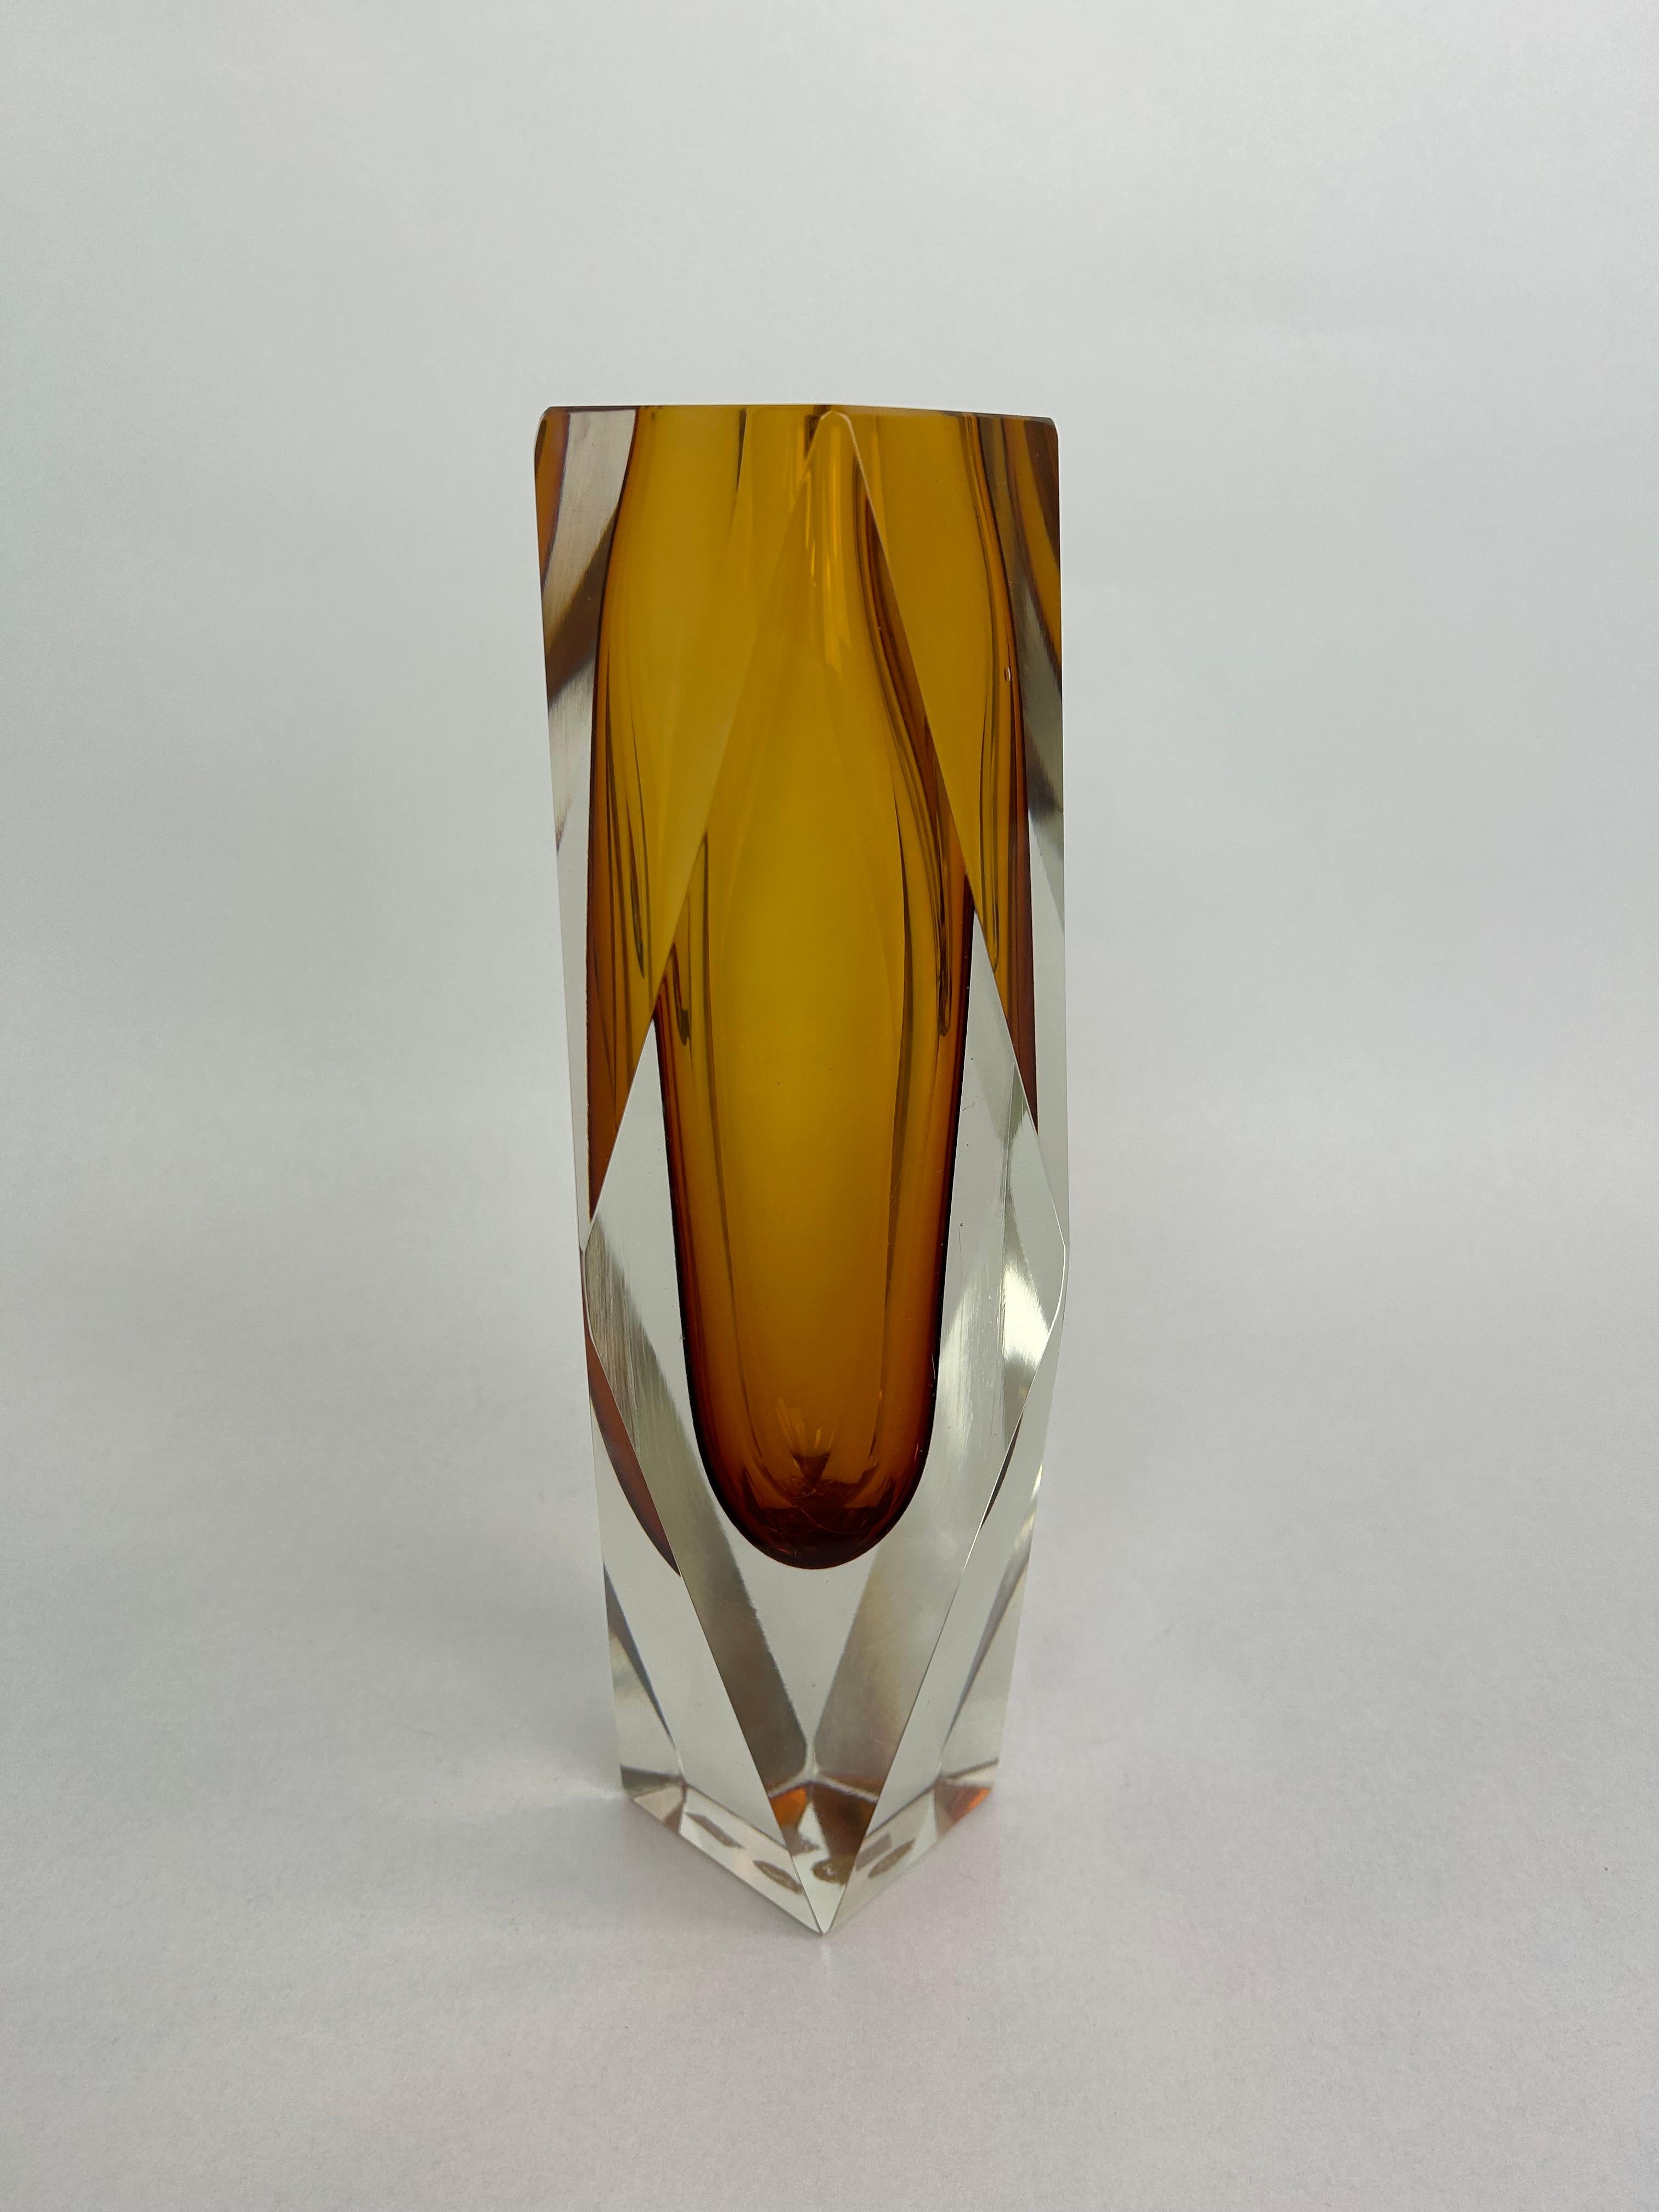 Yellow art glass vase by Flavio Poli for Murano in very good original condition. Signed with sticker on the bottom.